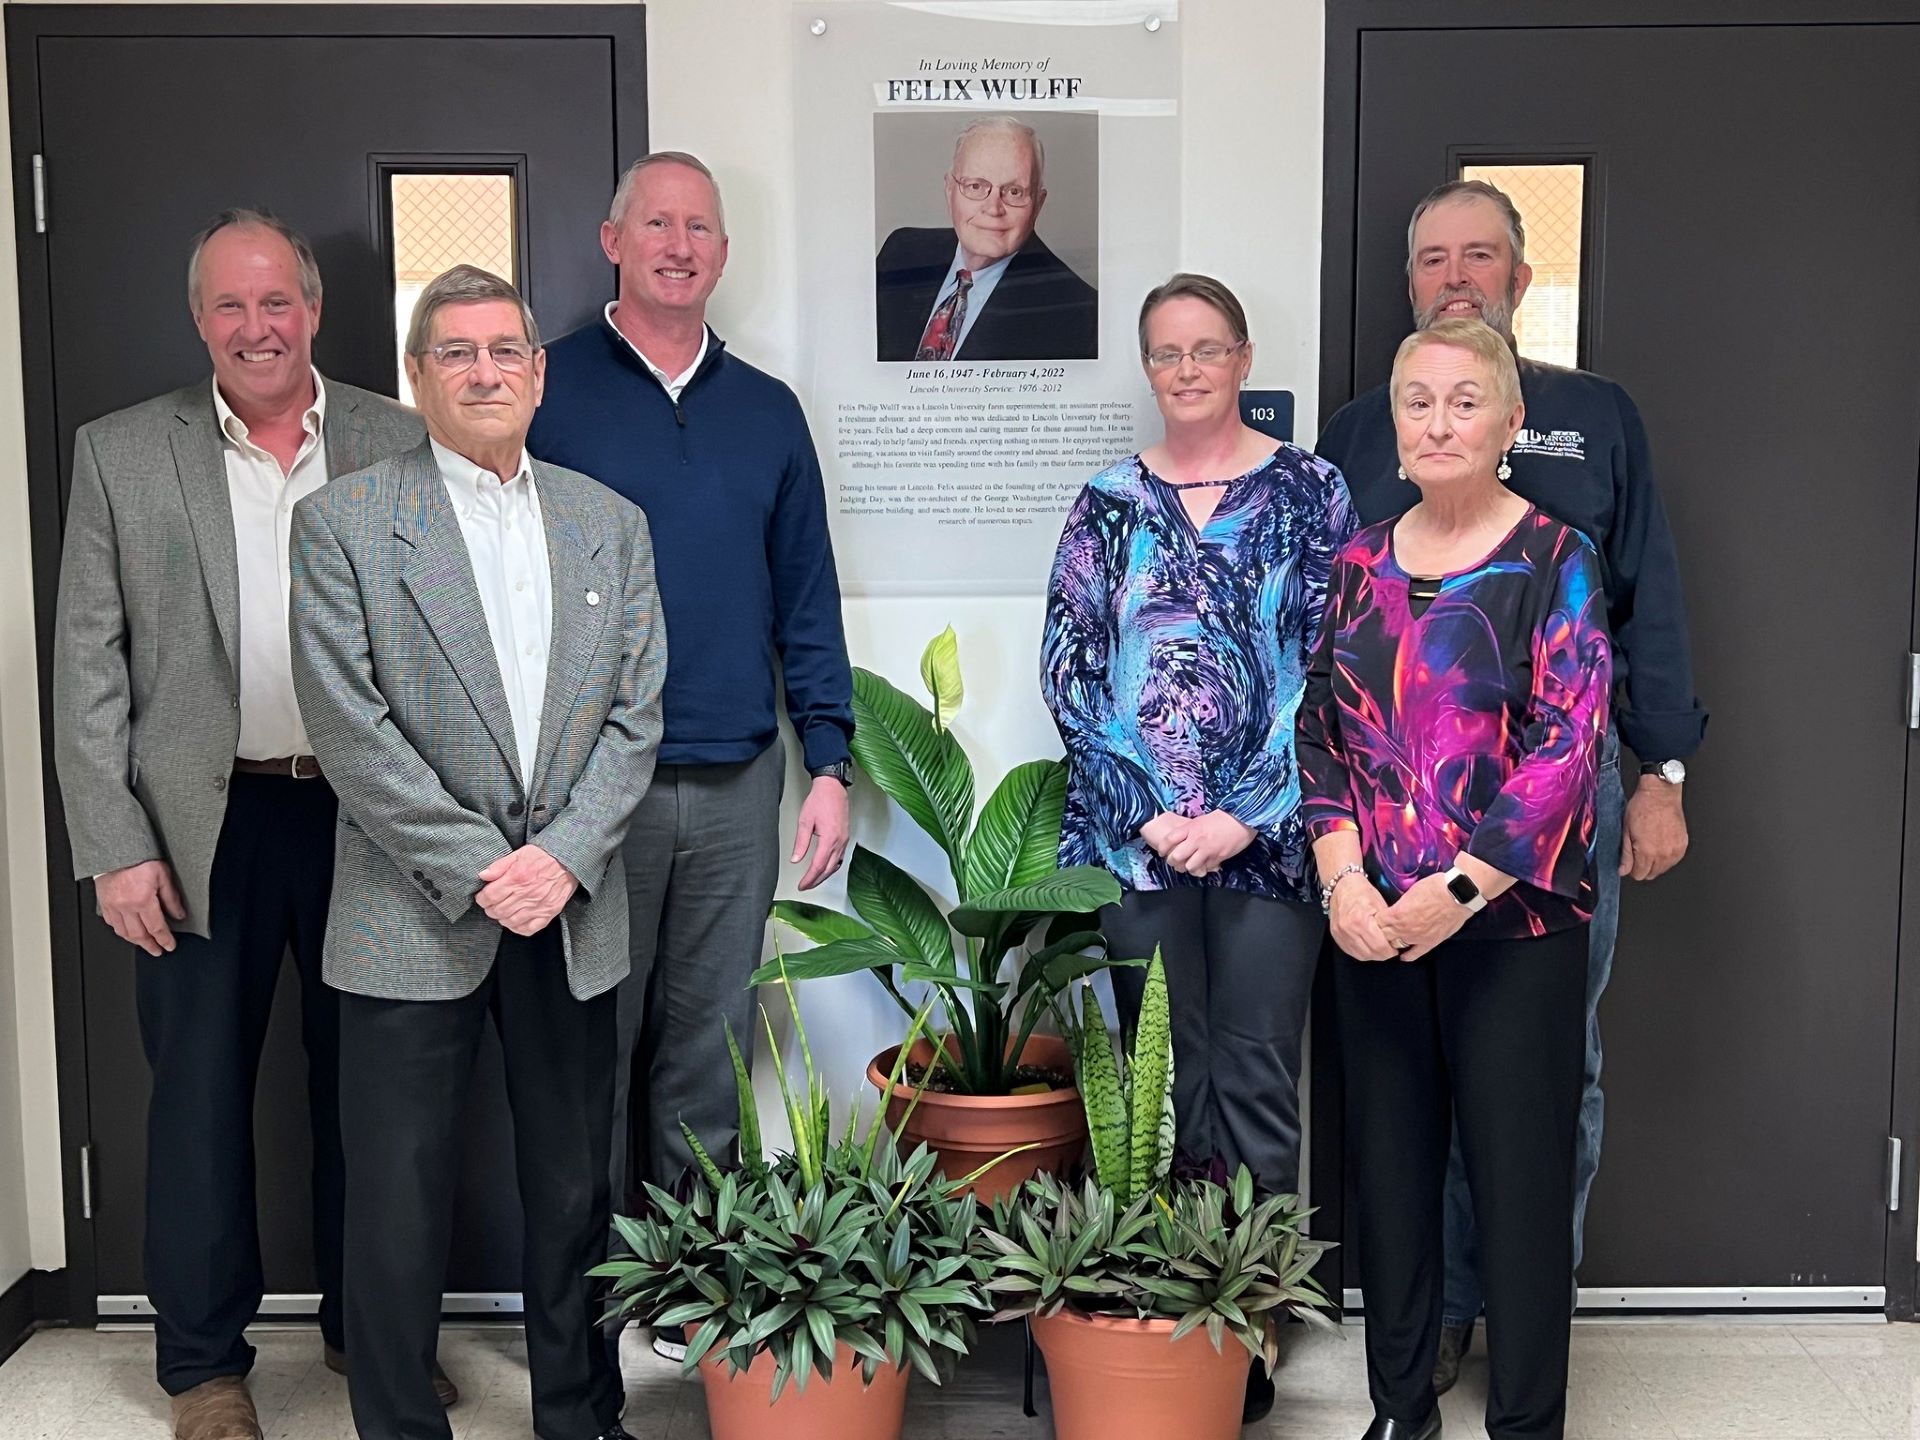 Lincoln University of Missouri honored former employee Felix Wulff with a plaque in the George Washington Carver Farm multipurpose room. Pictured left to right: Chris Boeckmann, LU farm superintendent; LU Curator Terry Rackers; LU President John, B. Moseley; Lisa Wulff, Wulff’s daughter; Joann Wulff, Wulff’s wife; and Doug Moeller, LU farm technician.